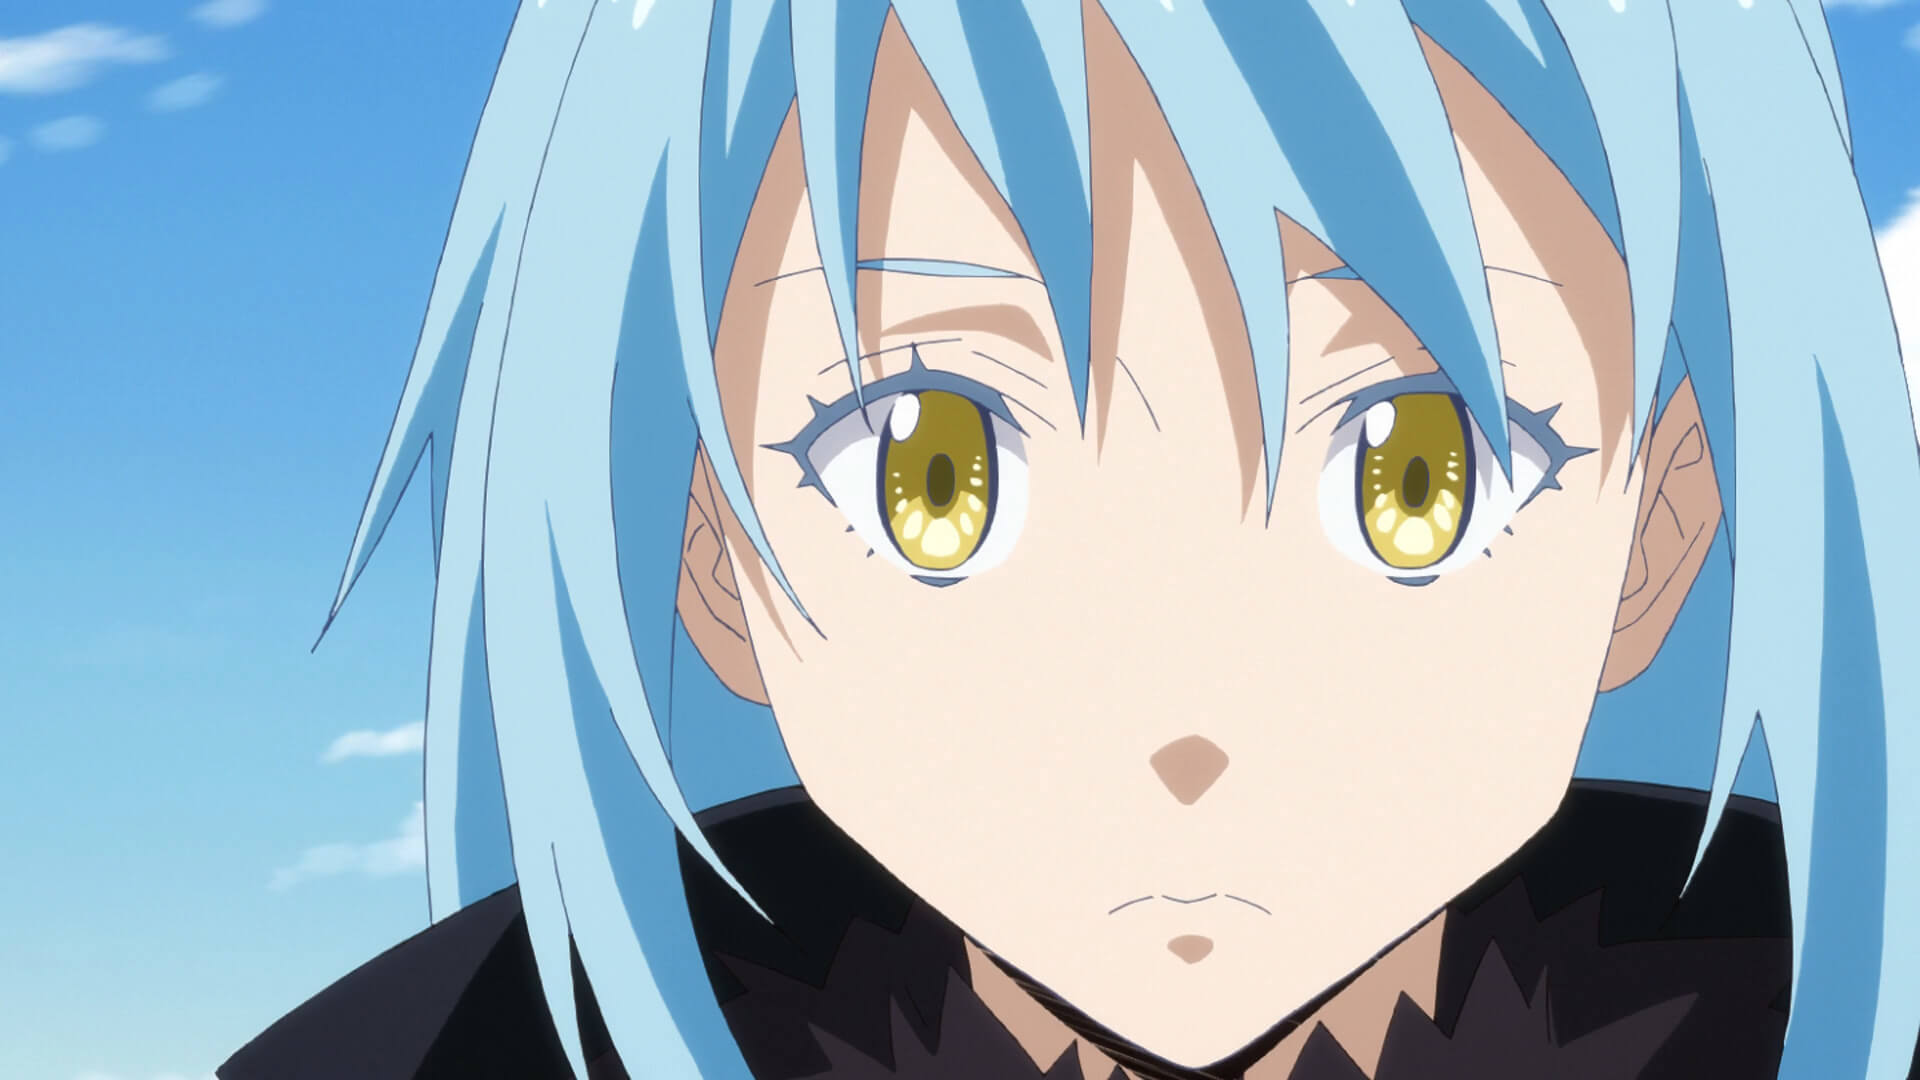 That Time I Got Reincarnated As A Slime Season 2 Episode 7: Release